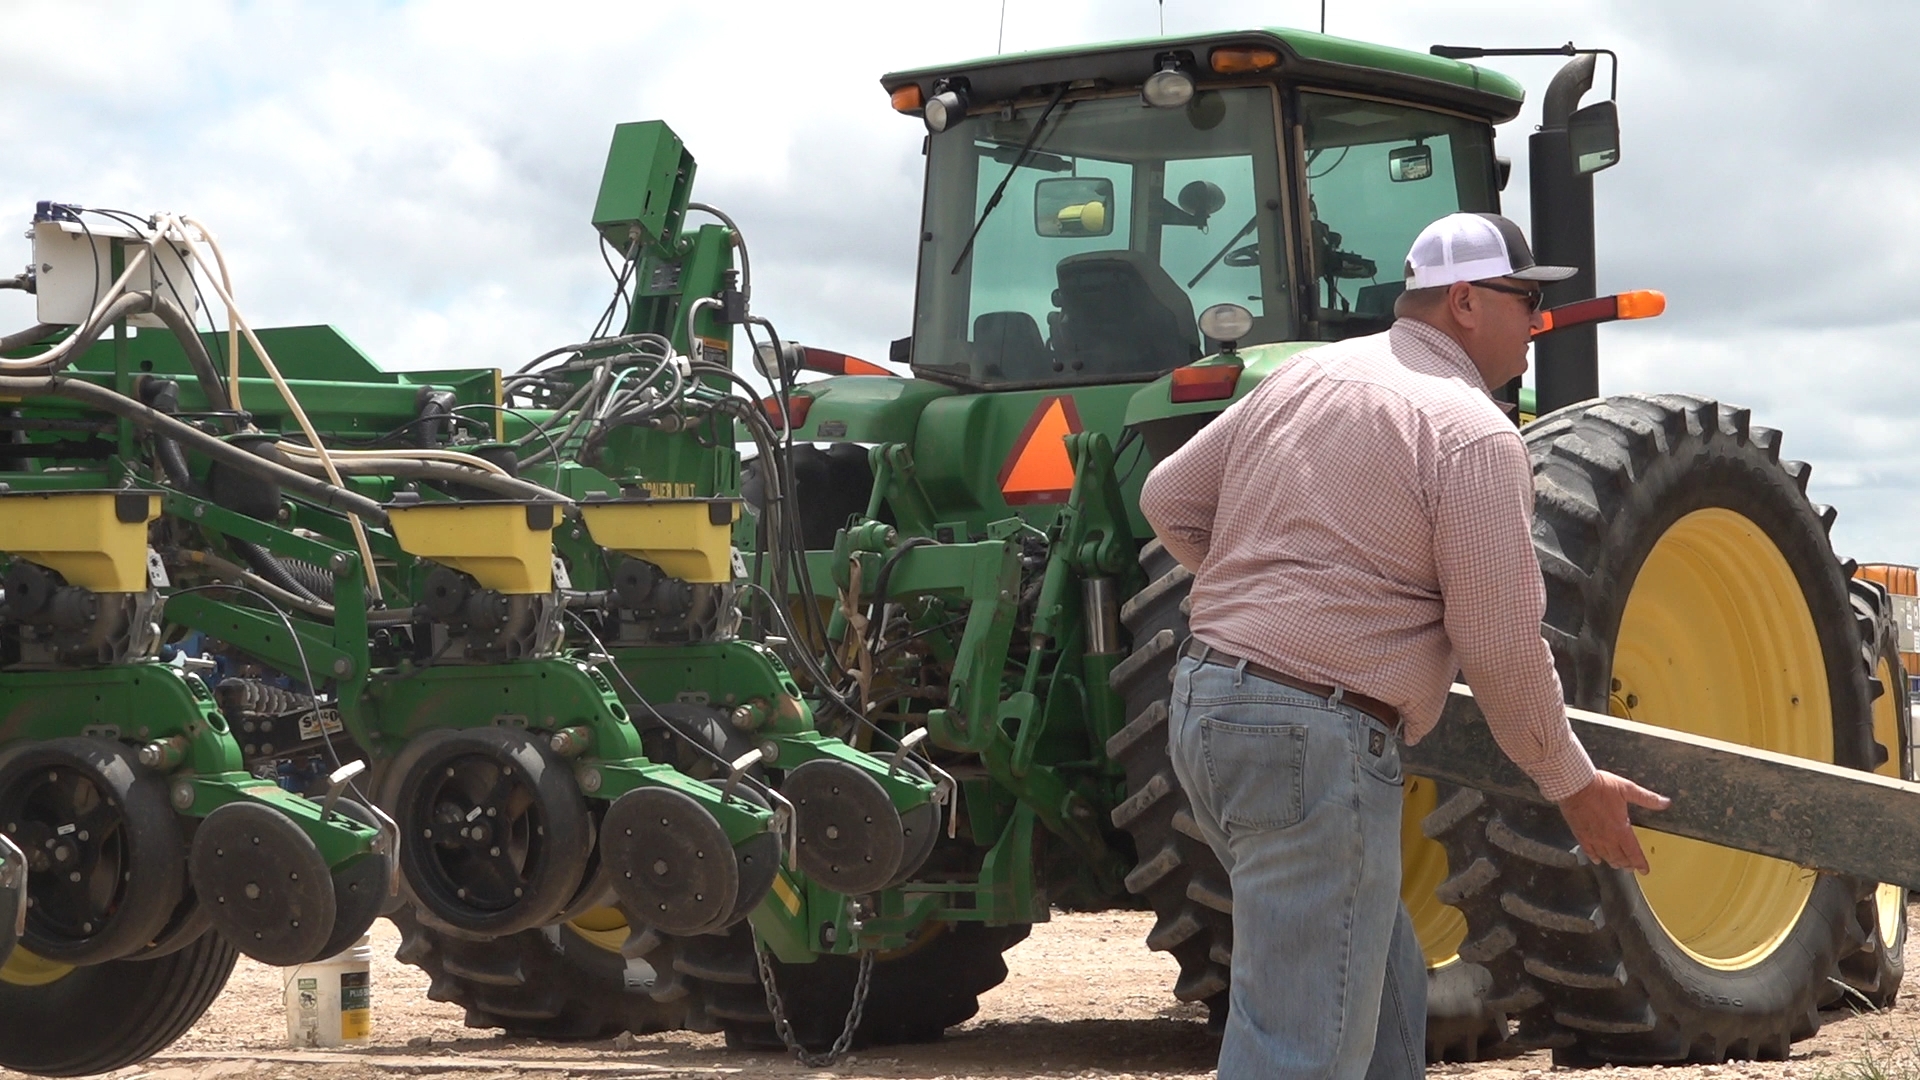 Bill Belew recently planted cotton at his Winters, Texas farm. He said a little bit of rain goes a long way.